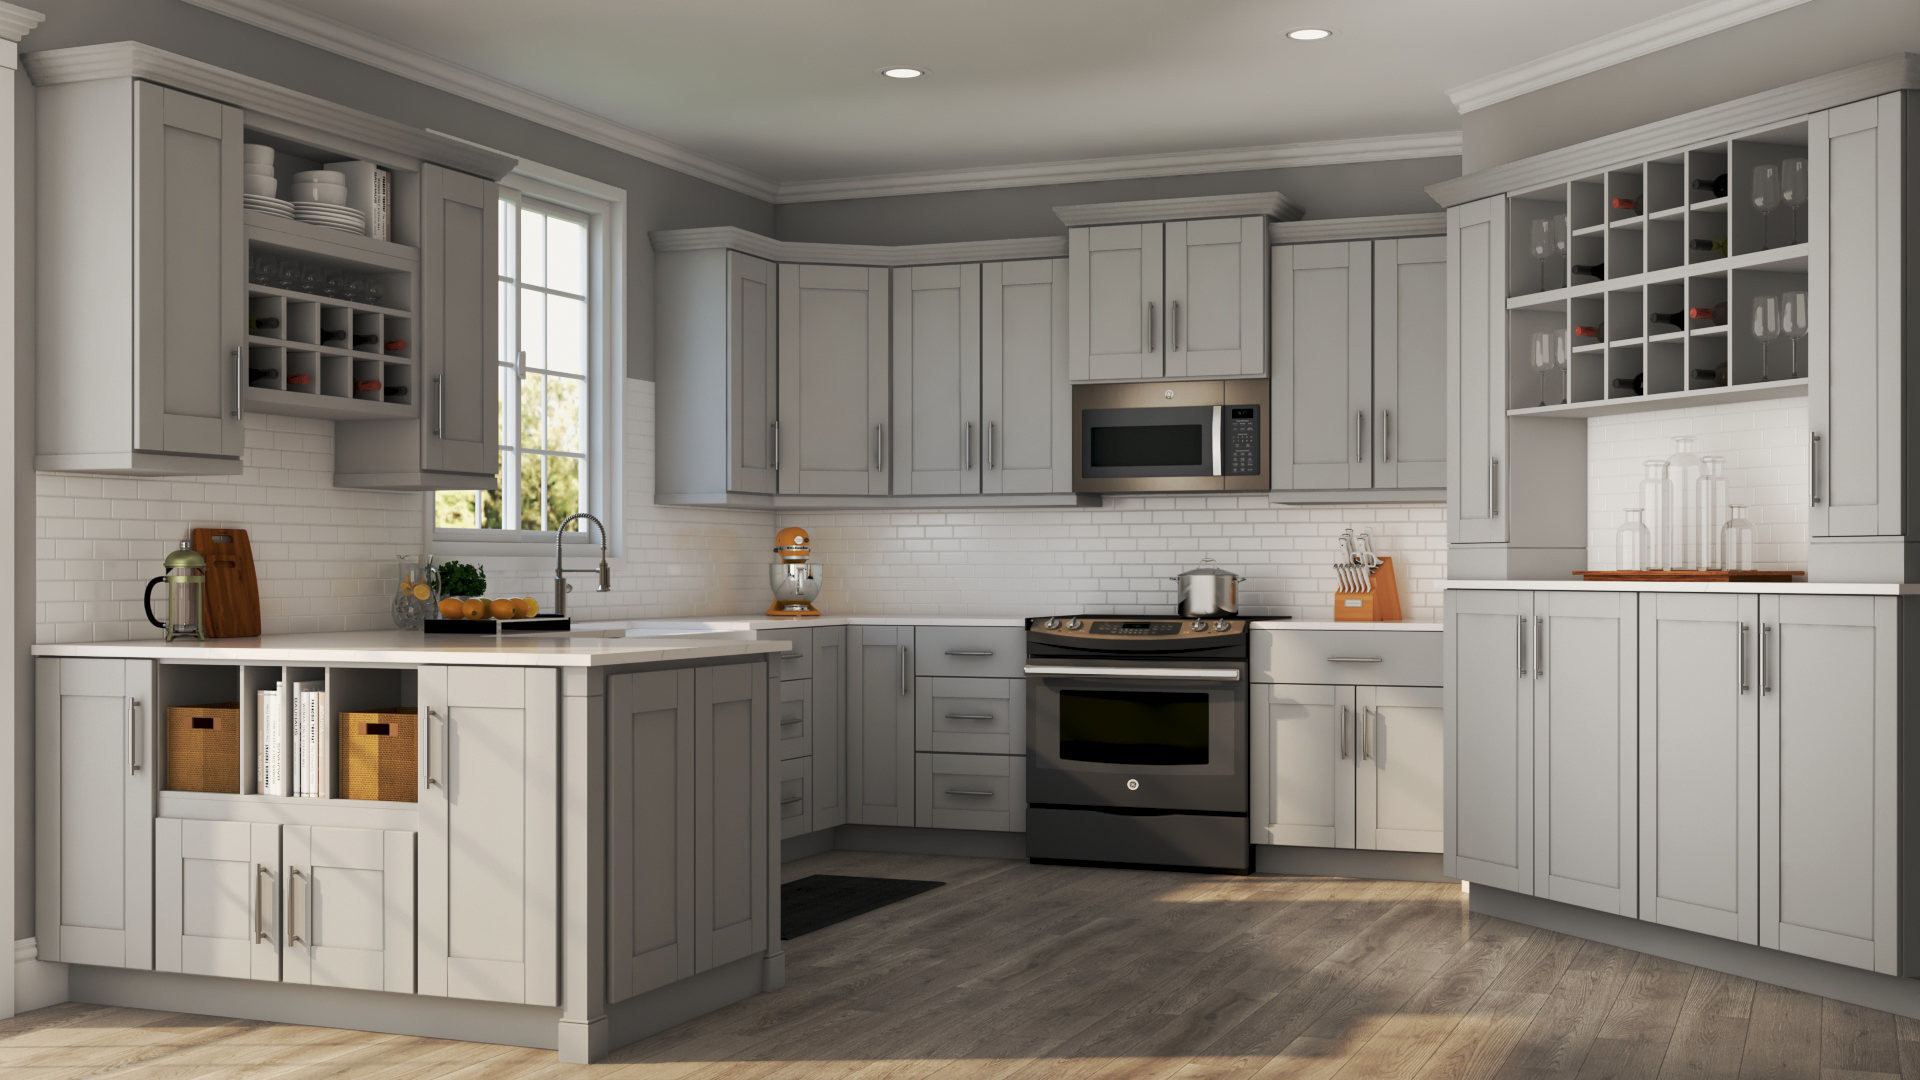 Homedepot Kitchen Cabinets
 Shaker Specialty Cabinets in Dove Gray – Kitchen – The